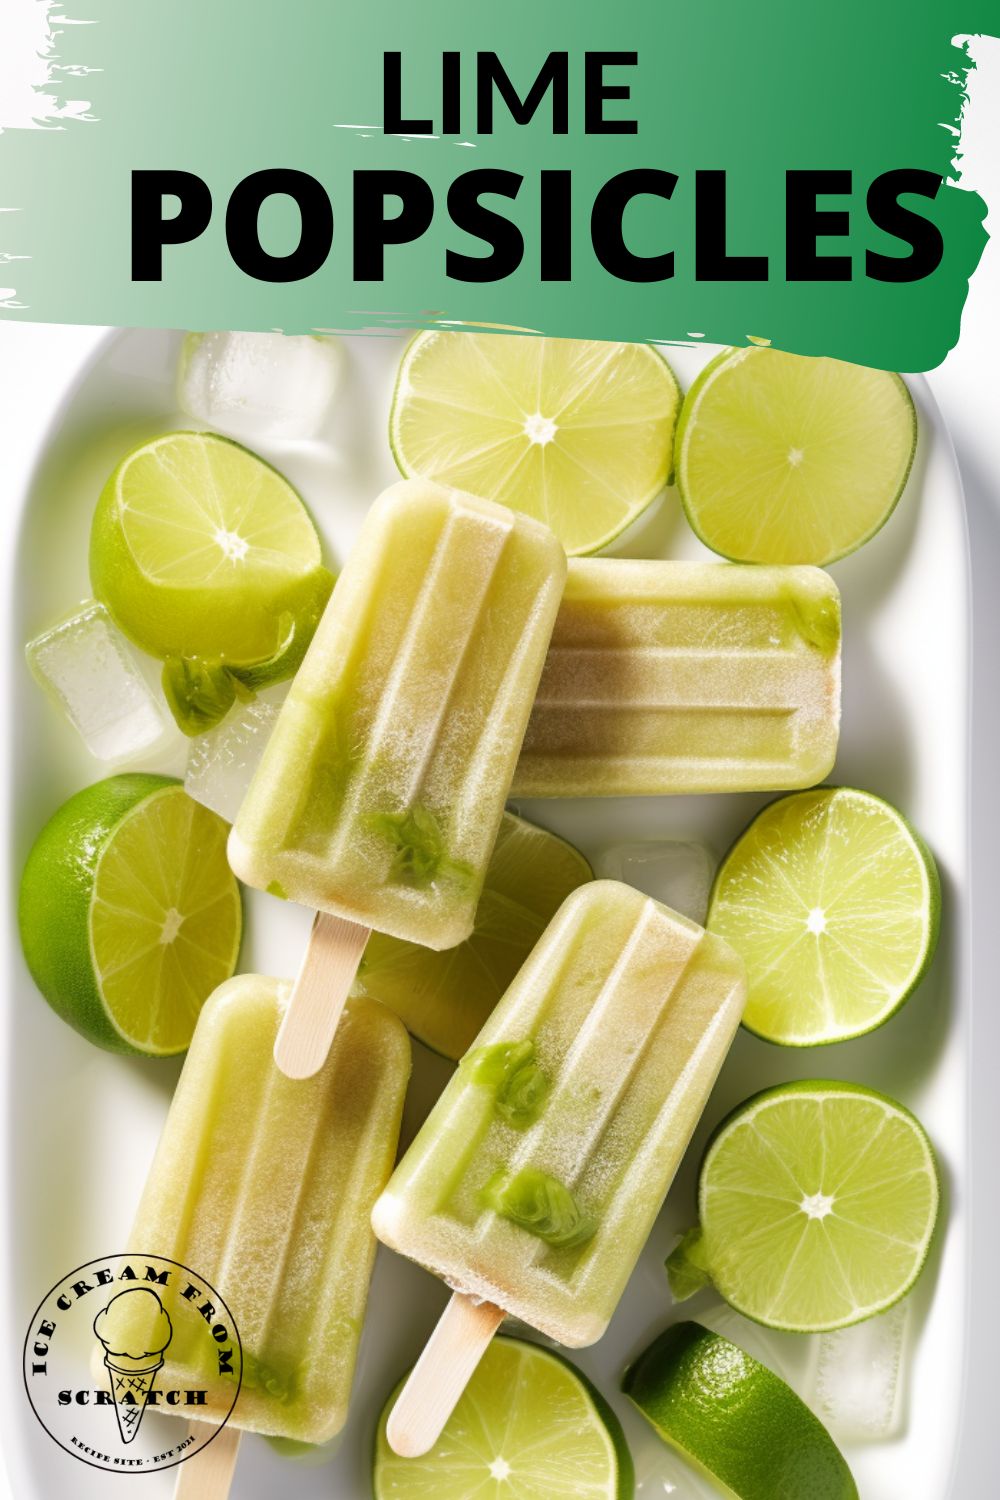 a platter of popsicles and limes. Text overlay says "lime popsicles